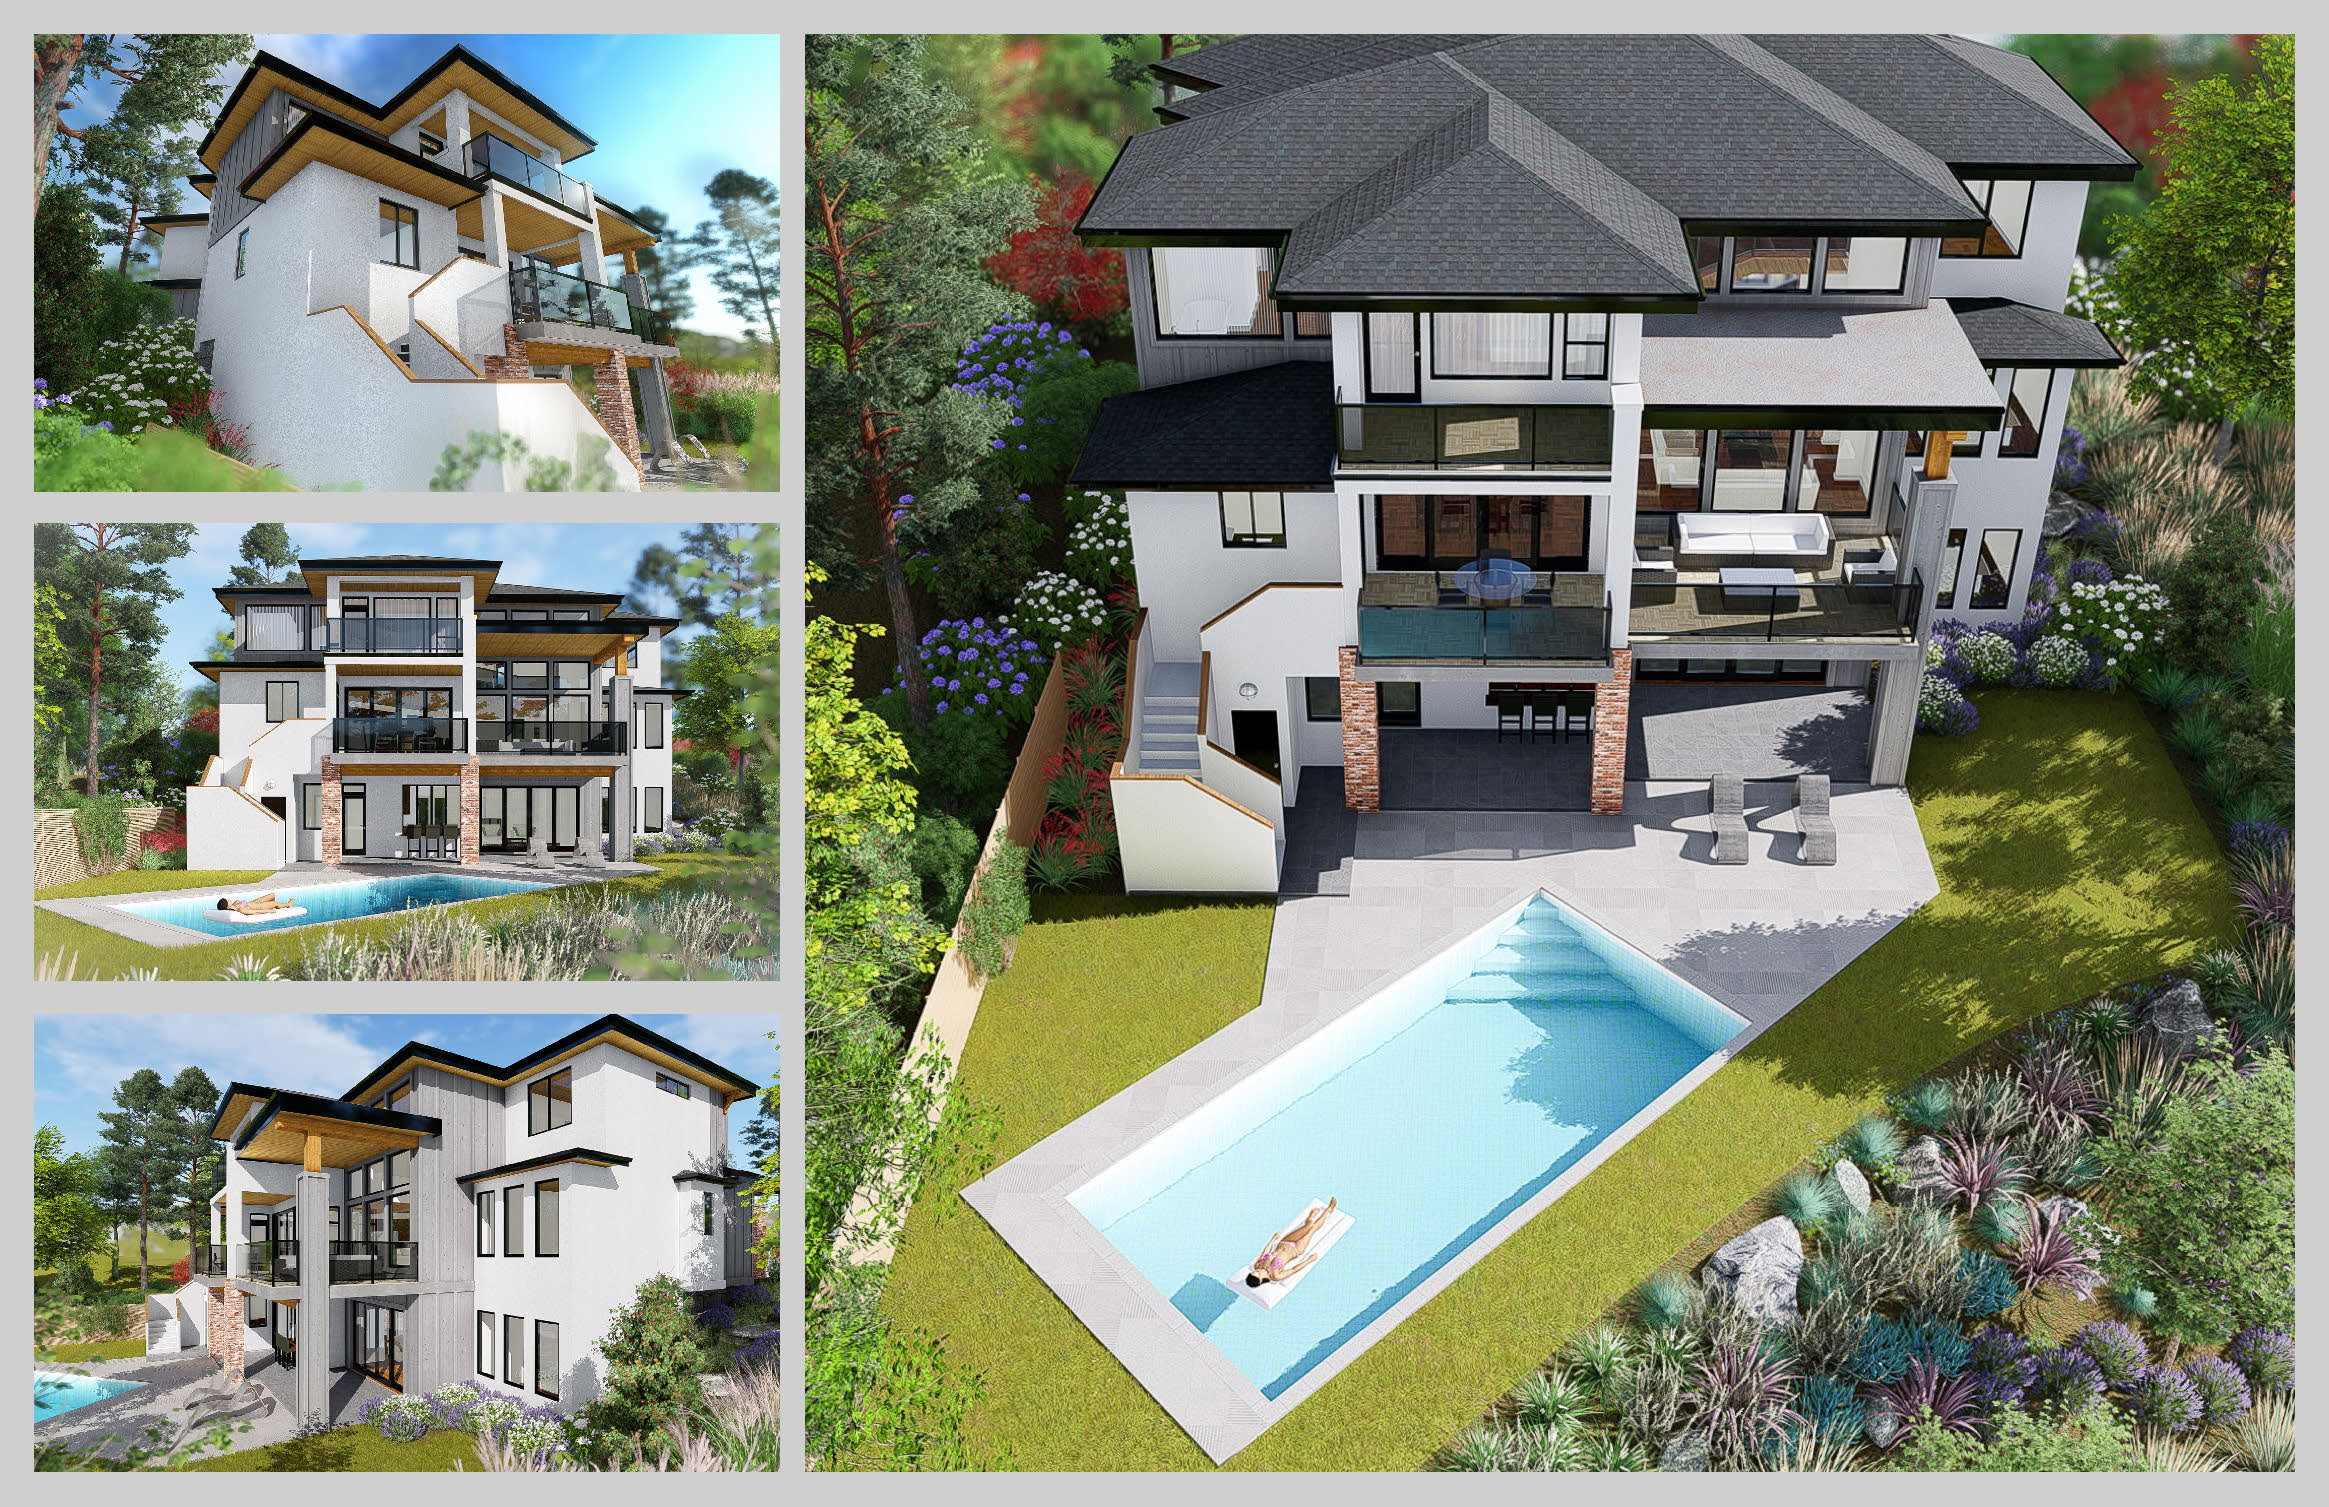 Home rendering for 472 Rockview Lane with 4 different angles, showcasing the large pool and luxury three floor design